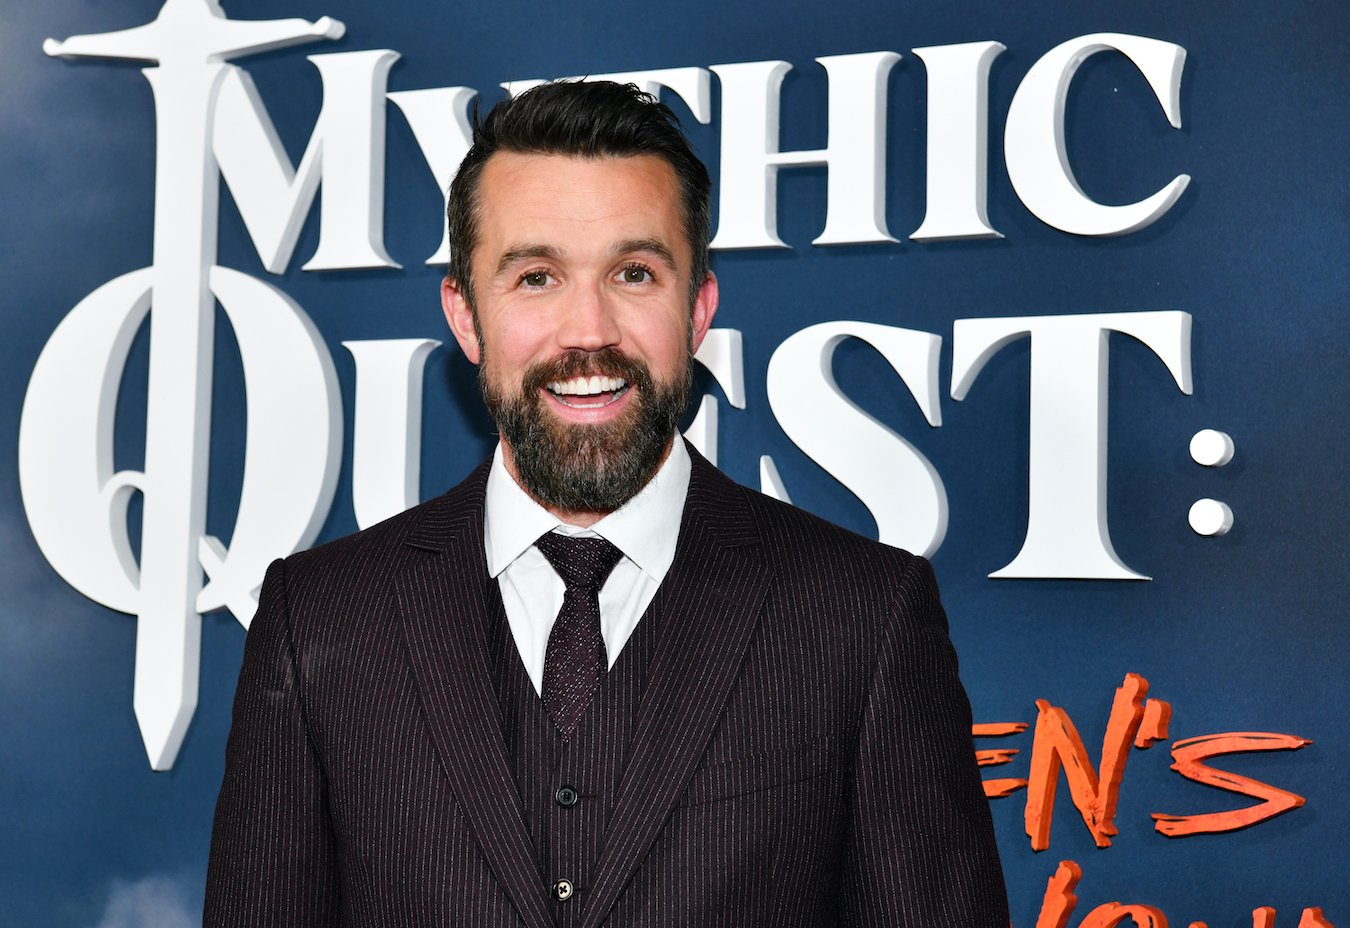 Rob McElhenney attends the premiere of 'Mythic Quest: Raven's Banquet' 